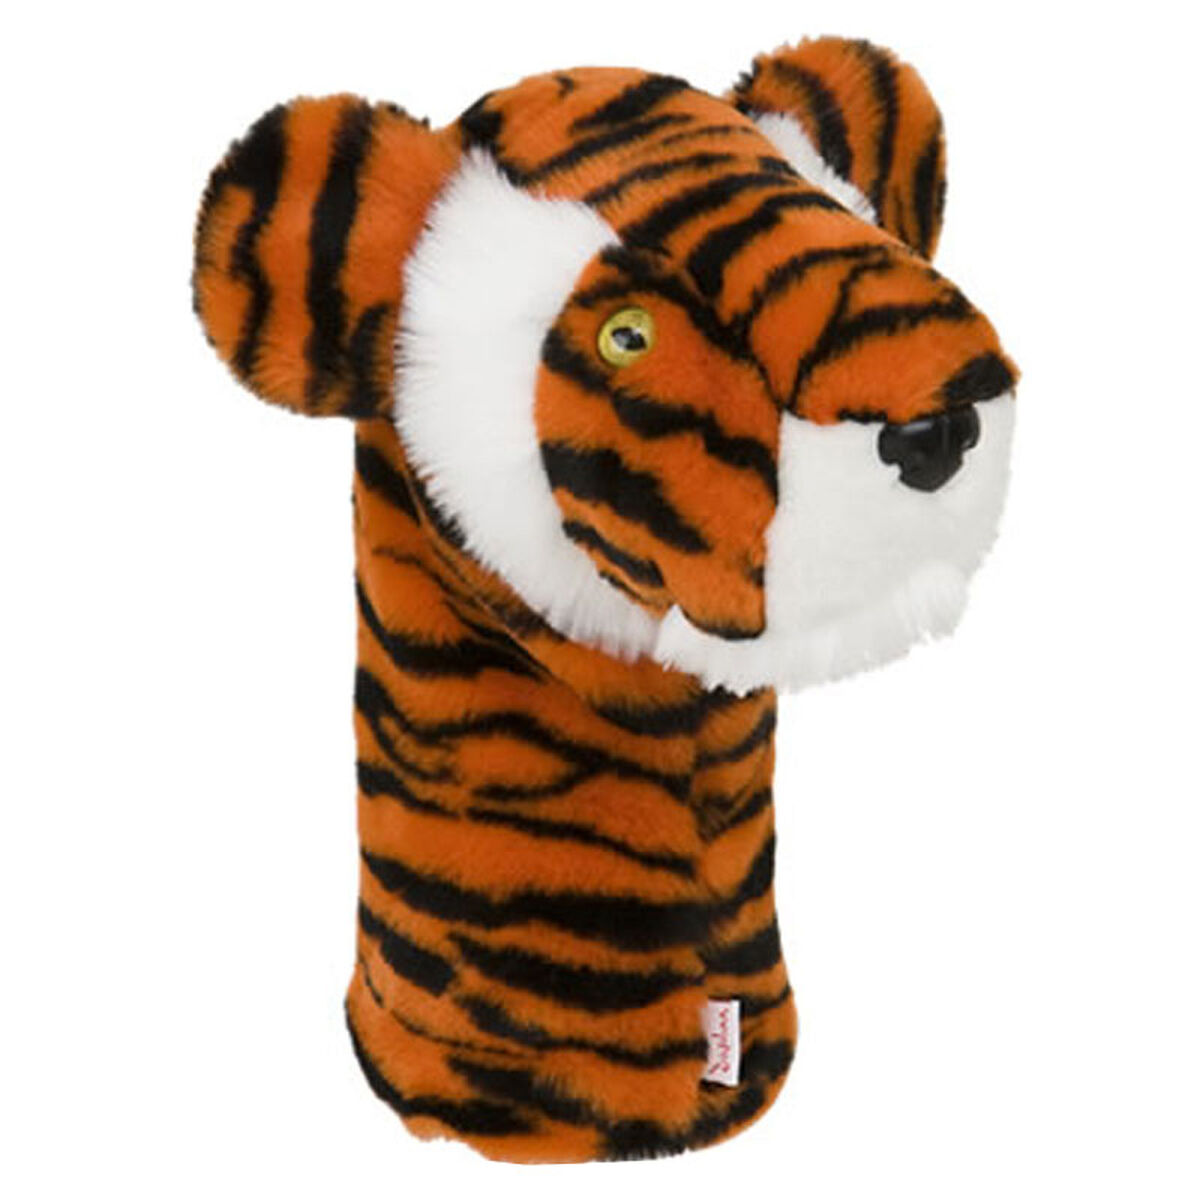 Daphne's Headcovers Head Cover, Orange and Black Daphnes Tiger, One Size | American Golf von Daphne's Headcovers